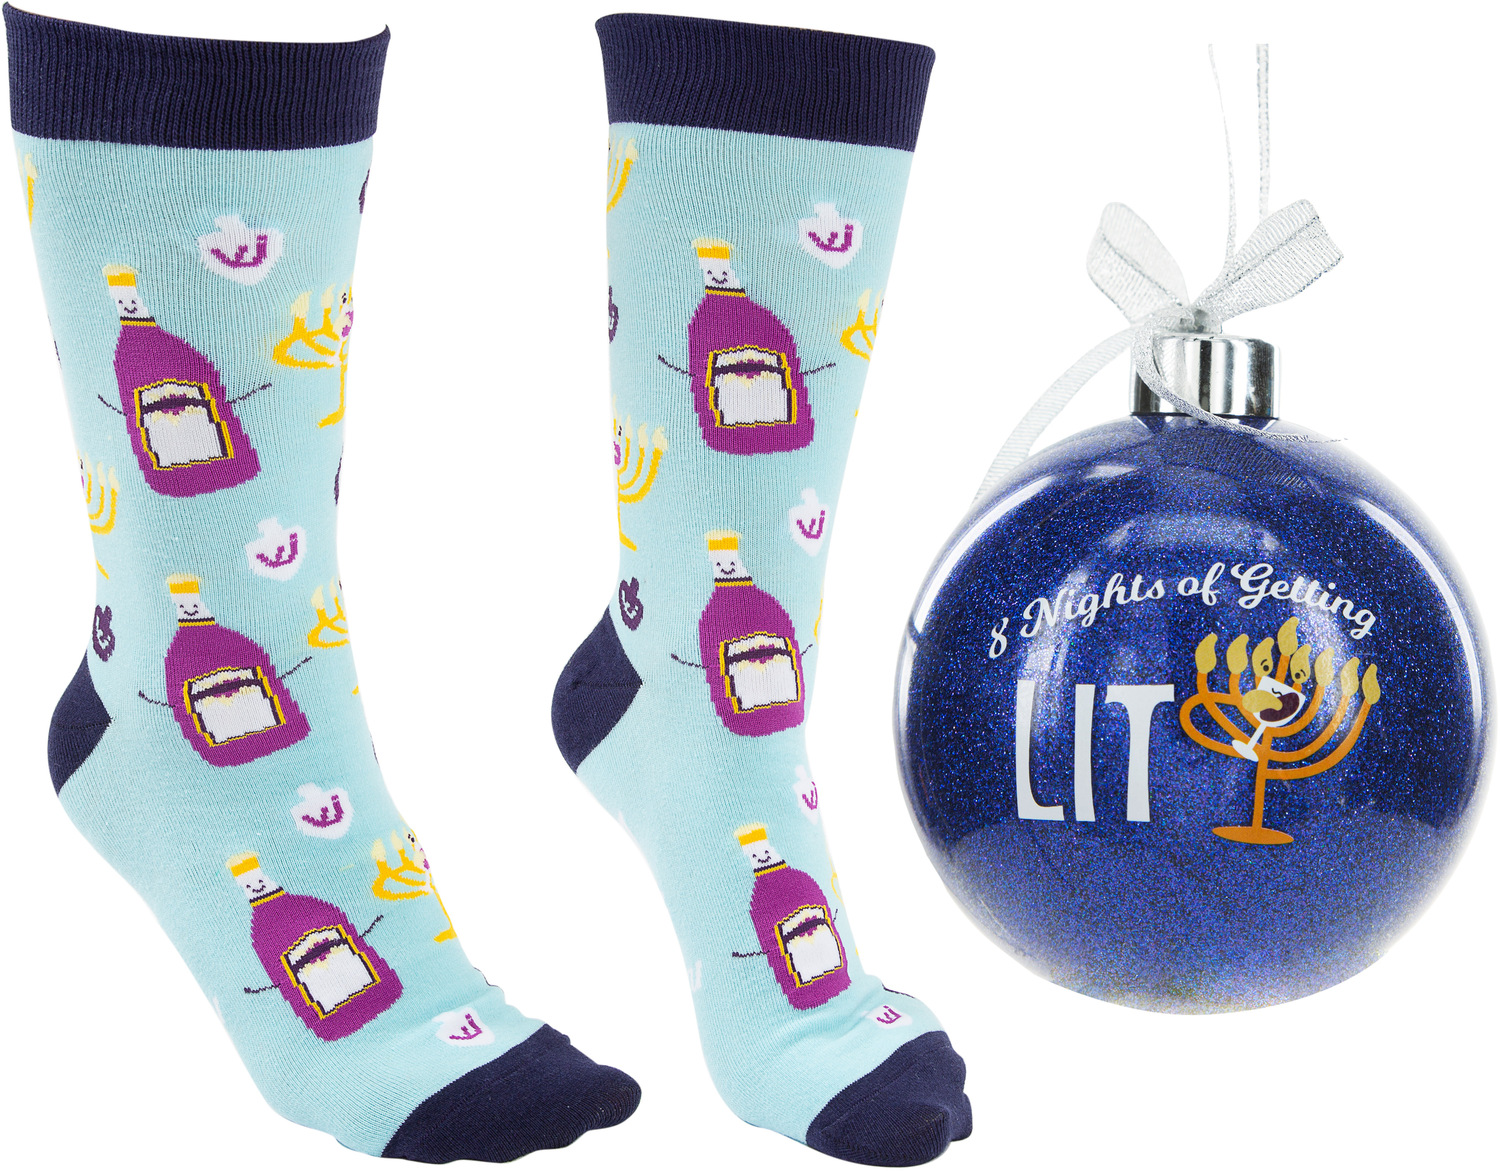 8 Nights by Late Night Last Call - 8 Nights - 4" Ornament  with Unisex Holiday Socks